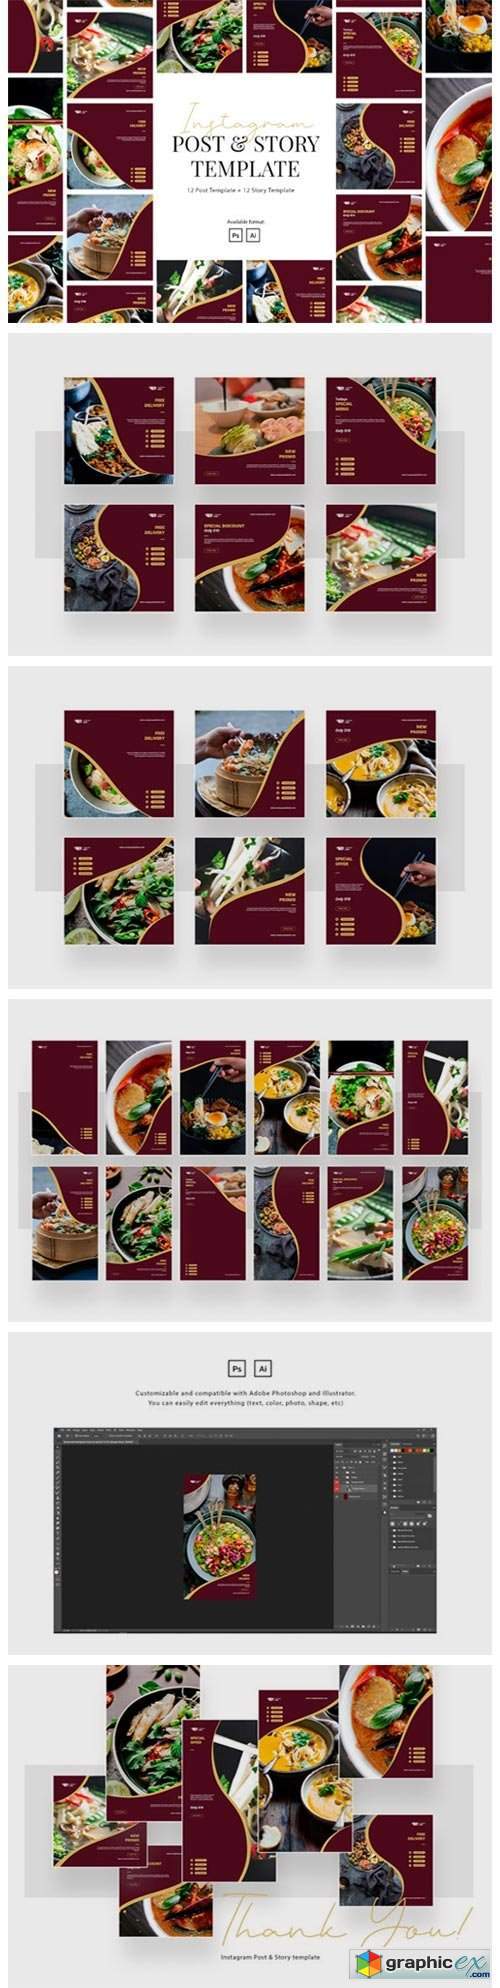 Restaurant Instagram Post and Story